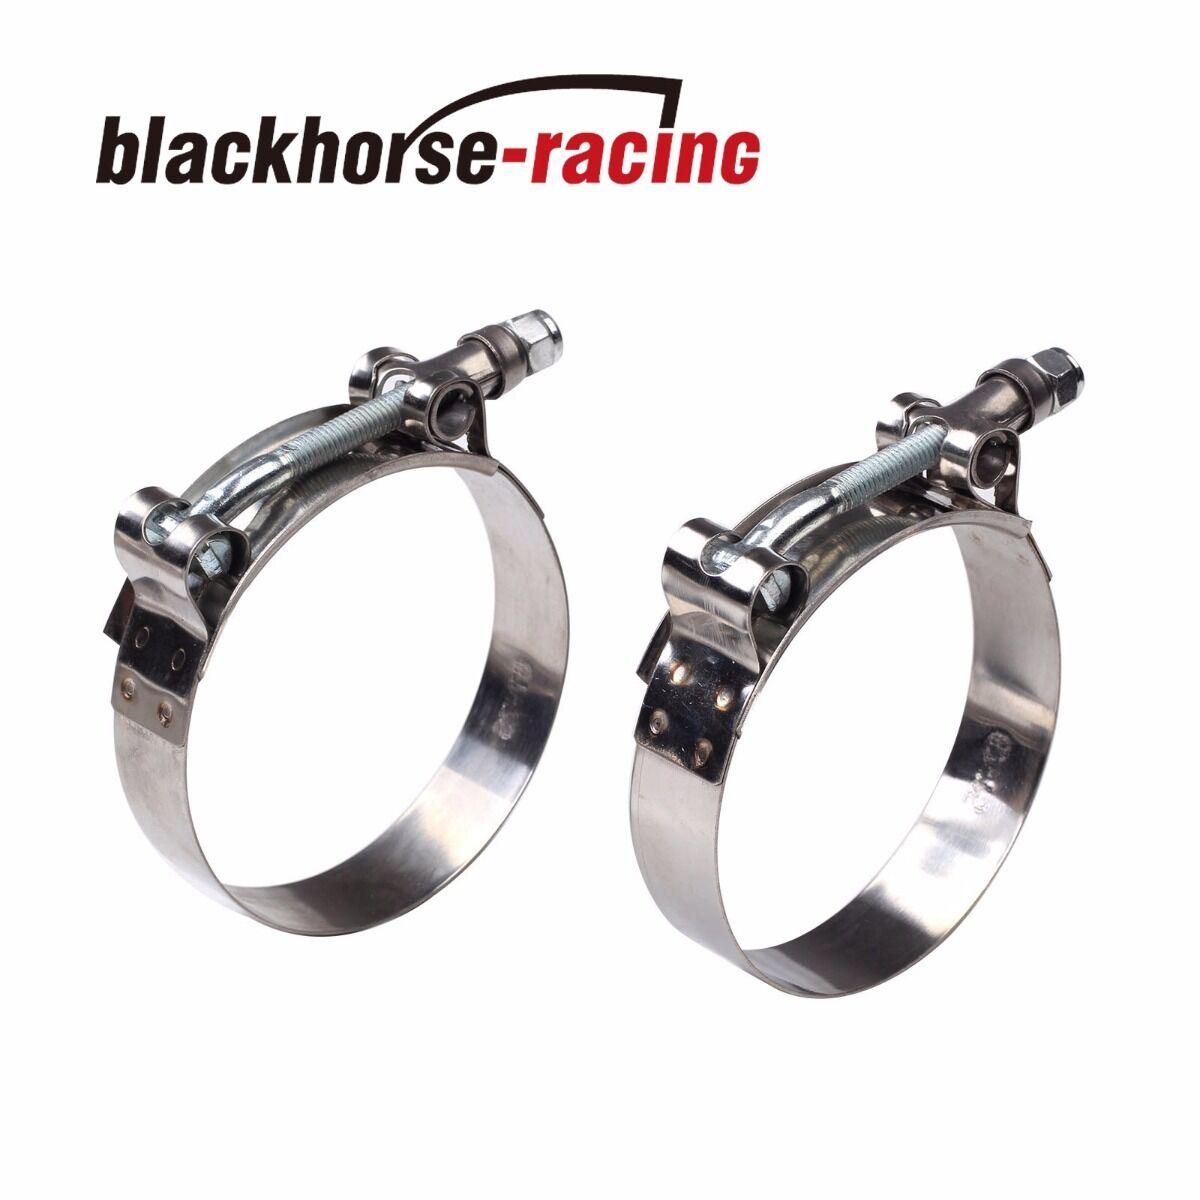 2PC For 4-1/4'' Hose (4.49"-4.8") 301 Stainless Steel T Bolt Clamps 114mm-122mm - www.blackhorse-racing.com